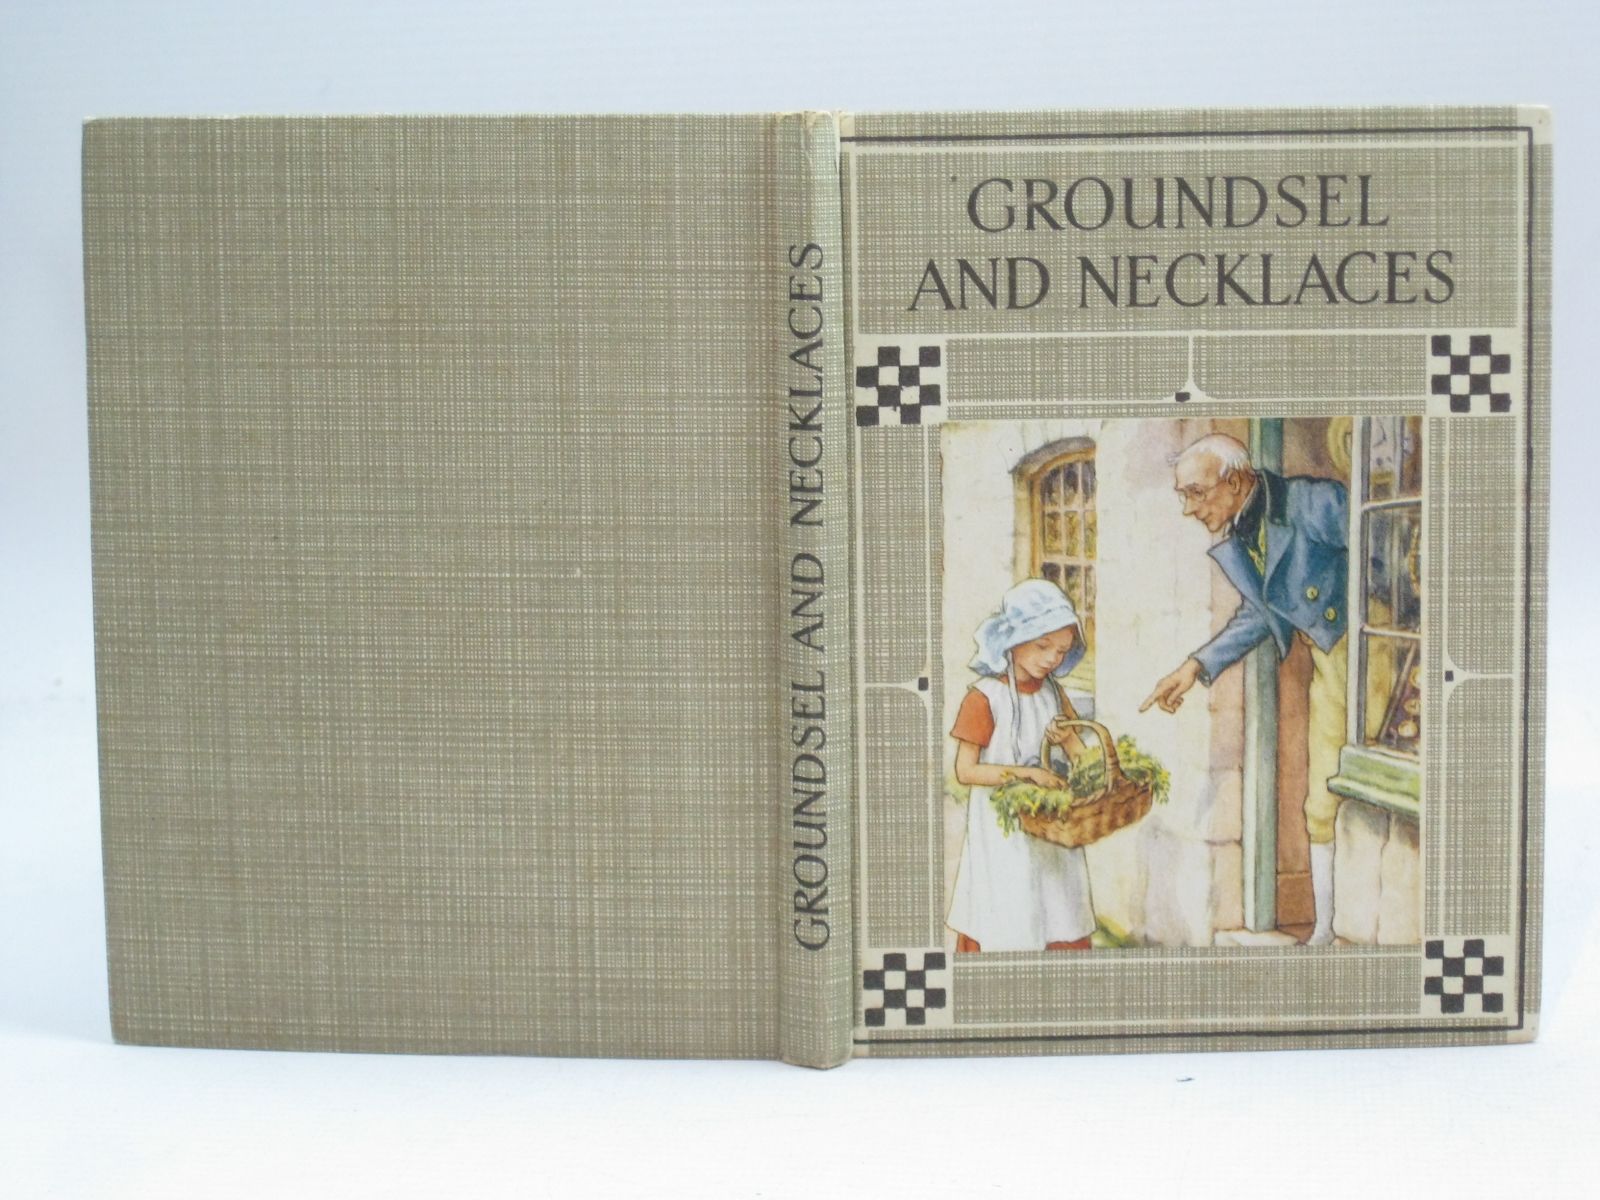 Photo of GROUNDSEL AND NECKLACES written by Barker, Cicely Mary illustrated by Barker, Cicely Mary published by Blackie & Son Ltd. (STOCK CODE: 1405867)  for sale by Stella & Rose's Books